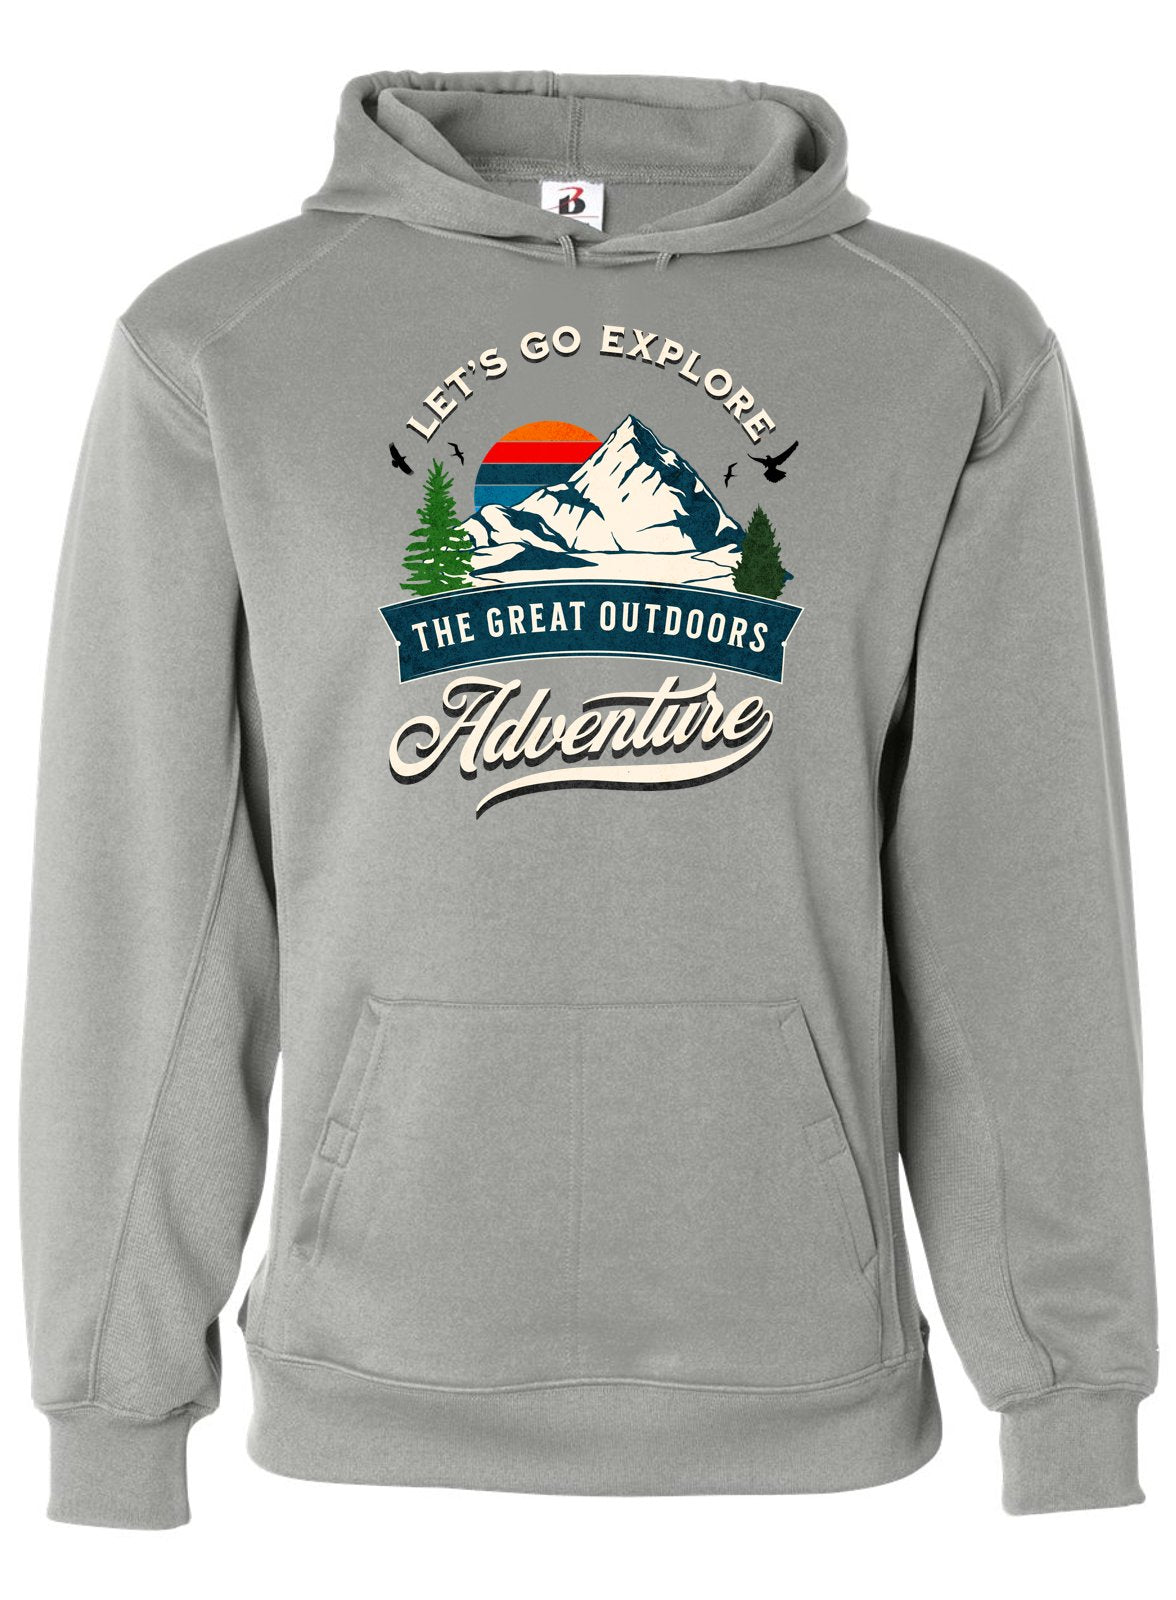 Lets Go Explore The Great Outdoors - Silver -